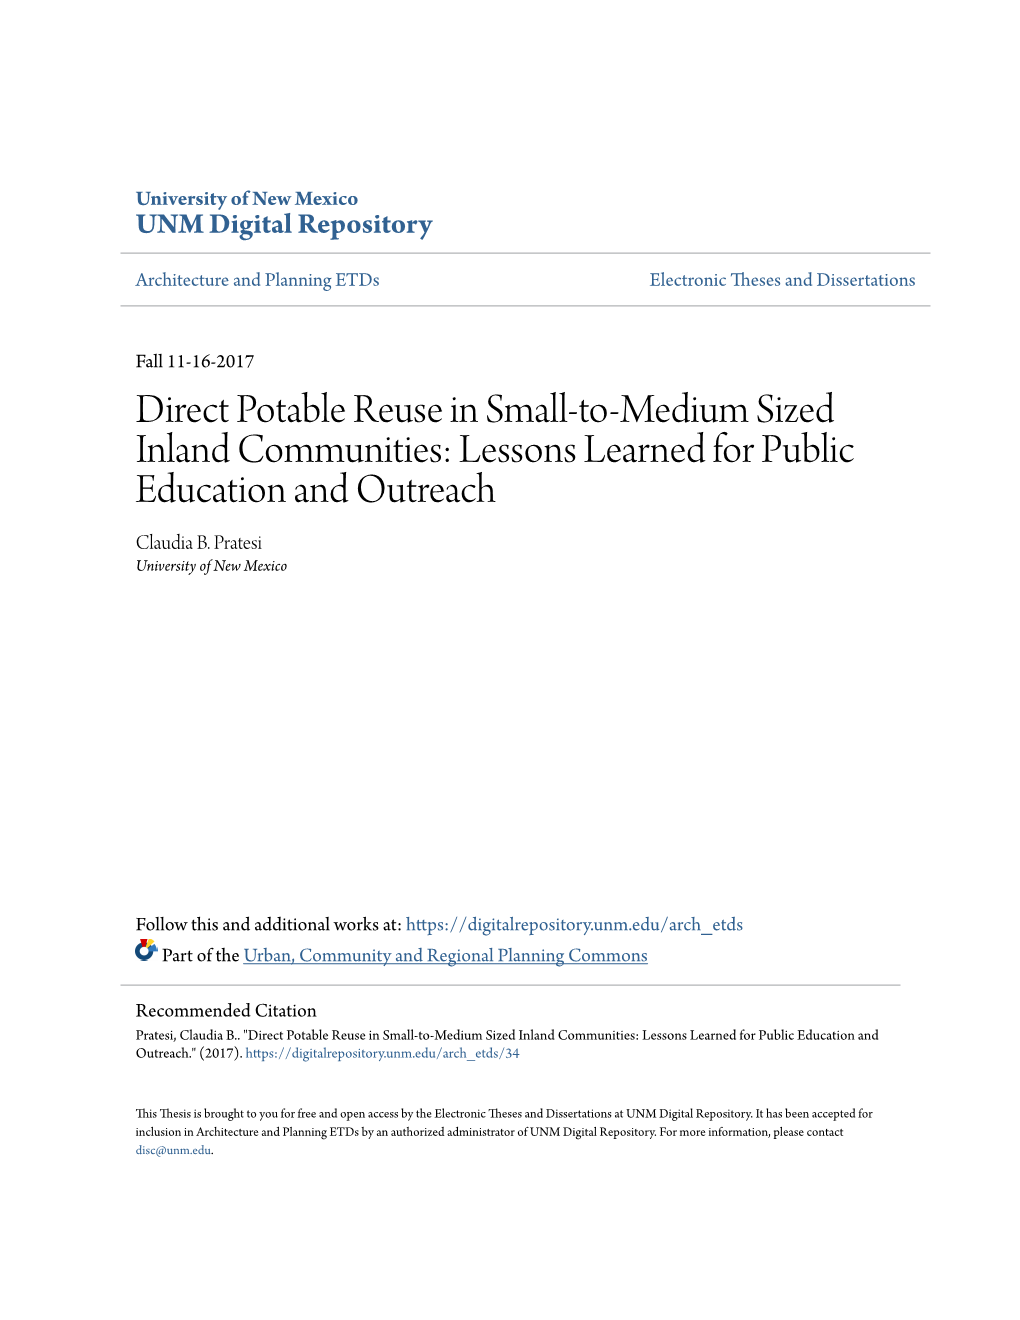 Direct Potable Reuse in Small-To-Medium Sized Inland Communities: Lessons Learned for Public Education and Outreach Claudia B